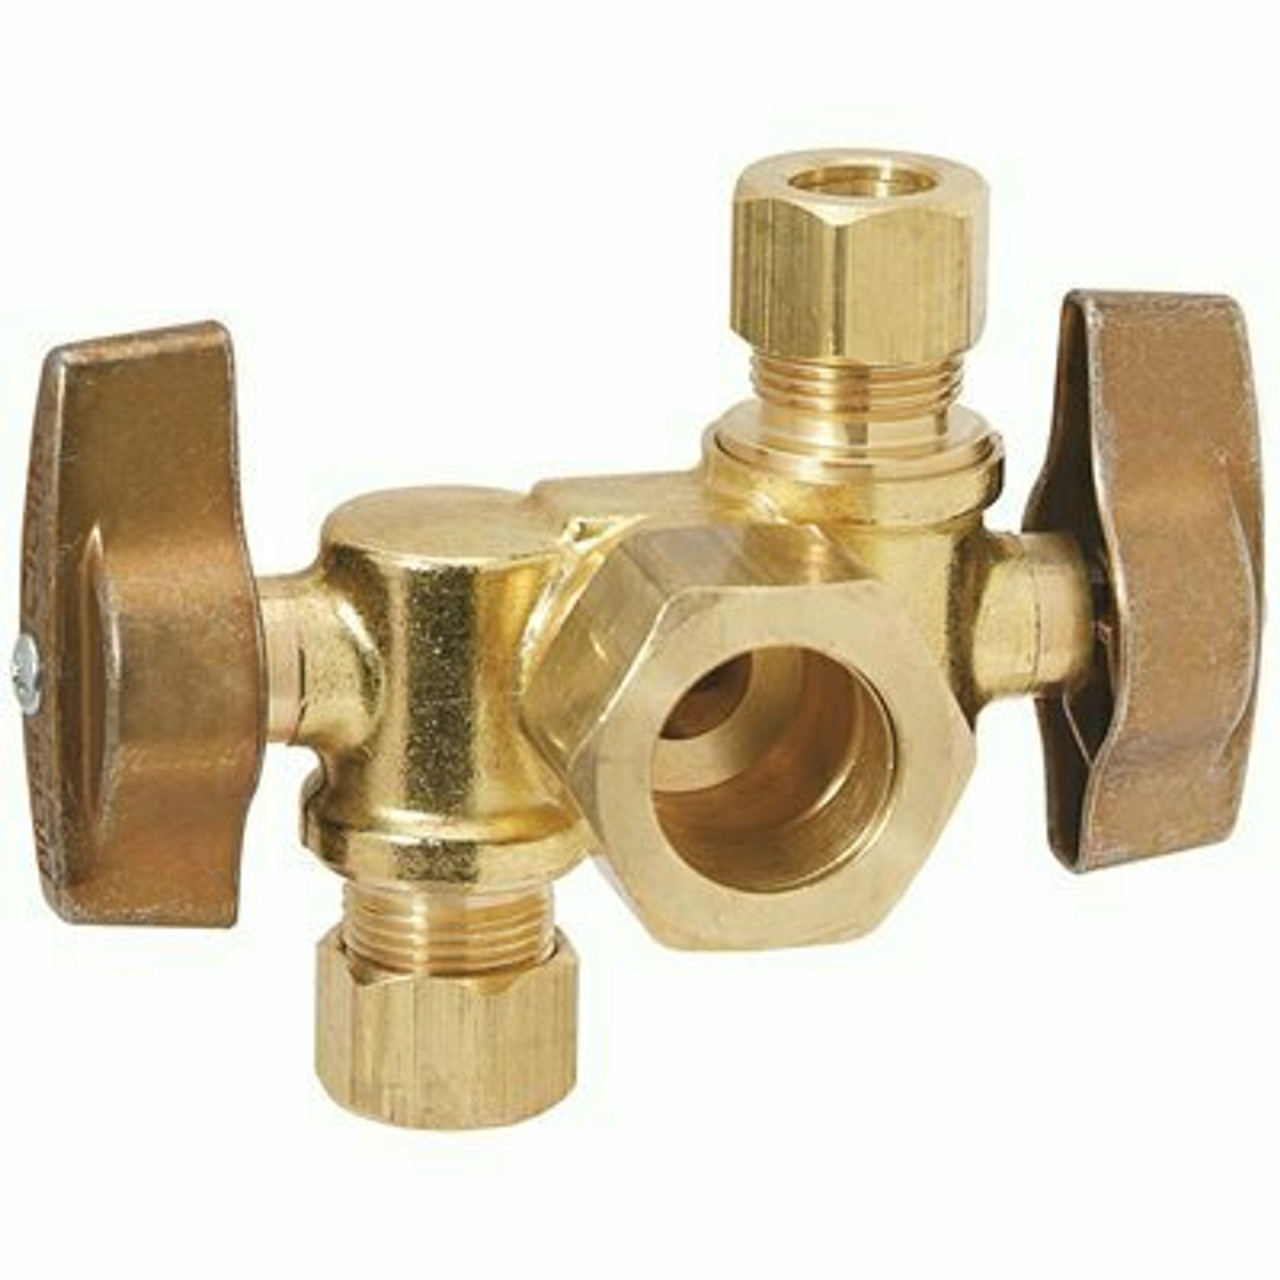 Brasscraft 1/2 In. Nominal Inlet X 3/8 In. O.D. Comp X 1/4 In. O.D. Dual Outlet Dual Shut-Off 1/4 In. Turn Angle Ball Valve